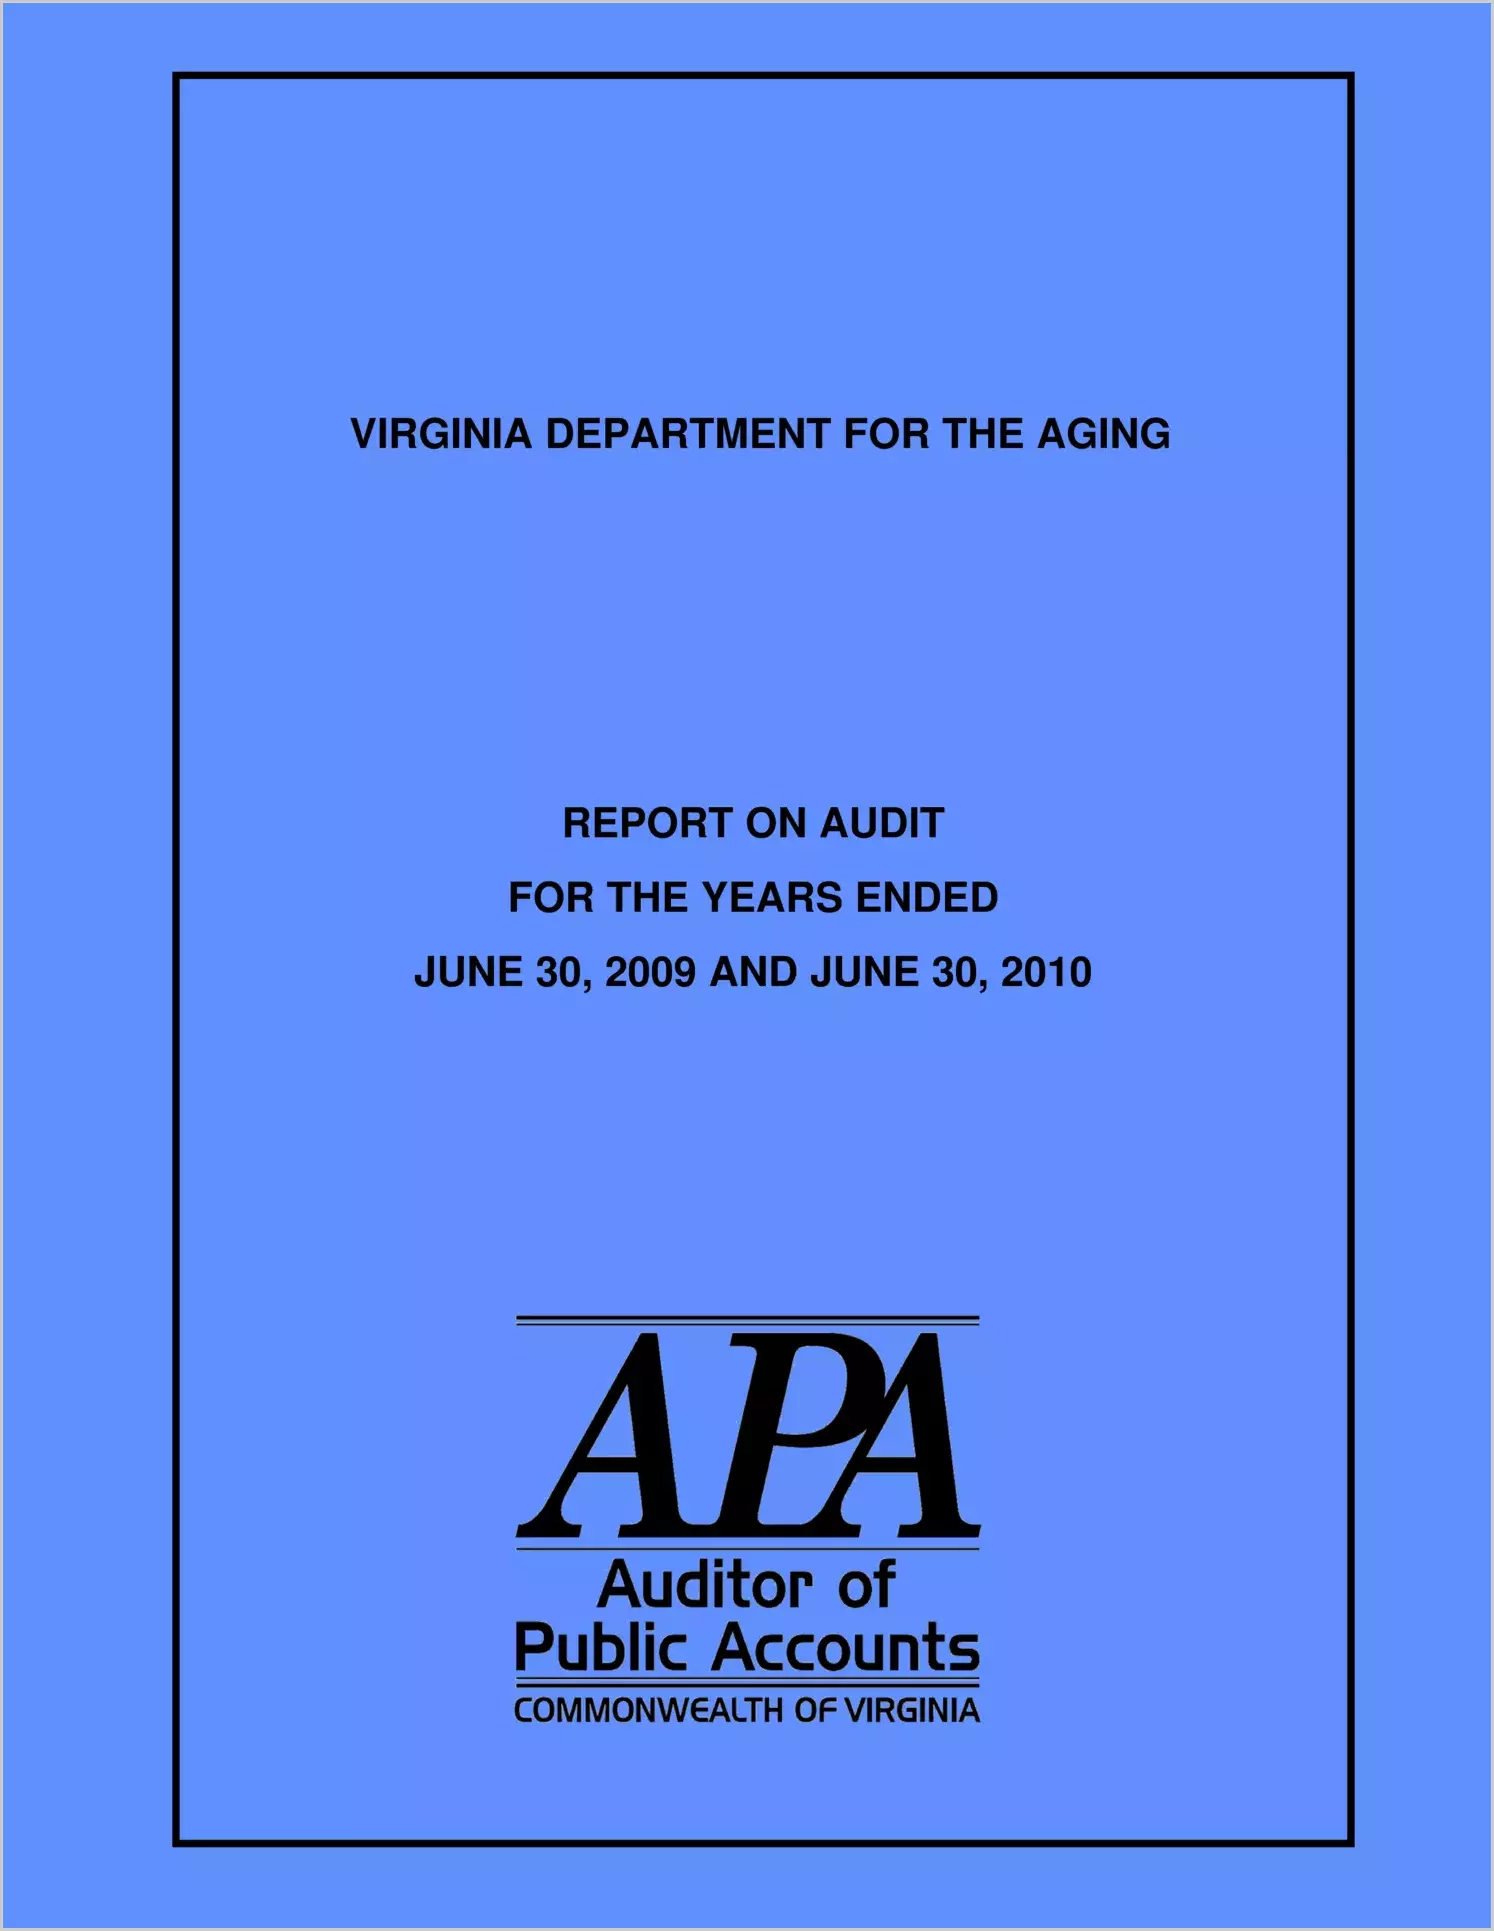 Department for the Aging for the Years Ended June 30, 2009 and June 30, 2010